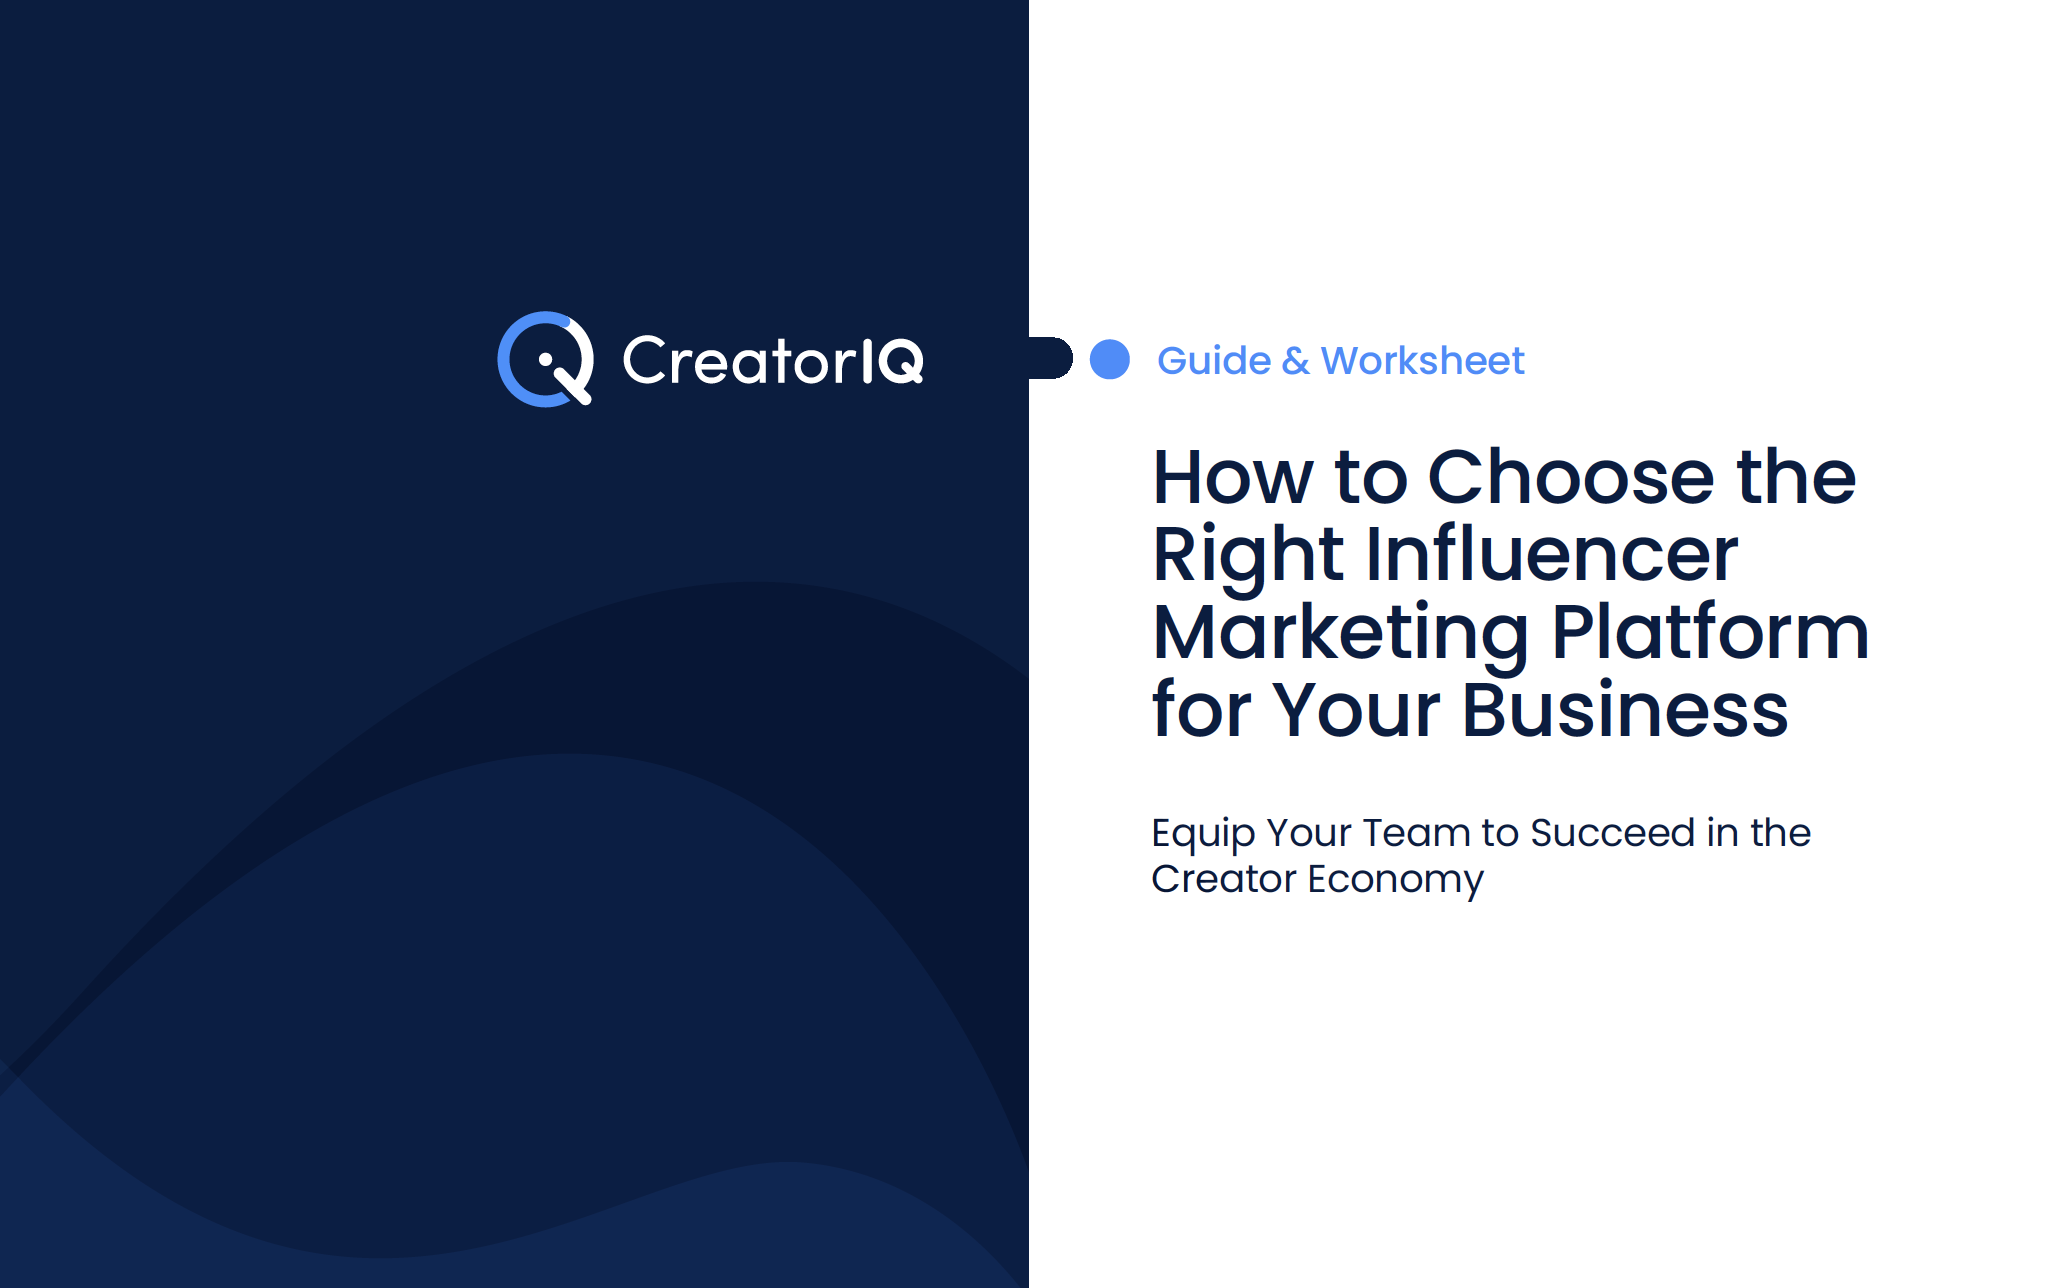 Platform Buying Guide: How to Choose the Right Influencer Marketing Platform for Your Business